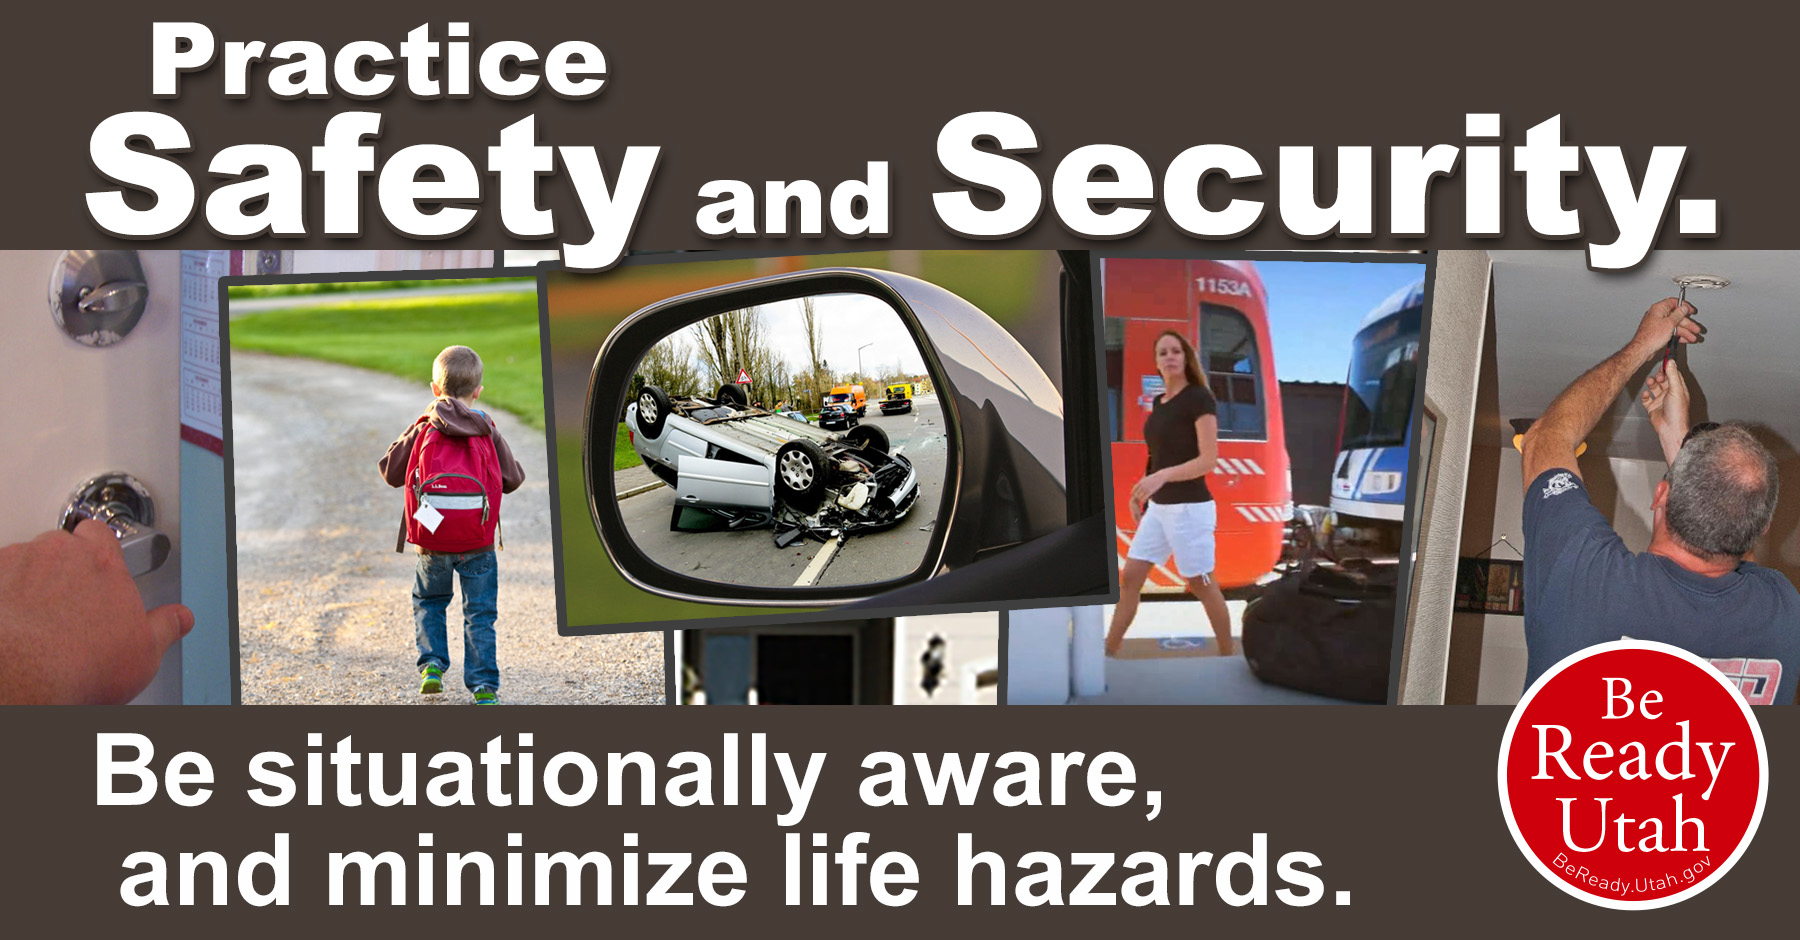 Practice Safety and Security. Picture of locking door, child walking alone, car accident, woman seeing abandoned bag in train station, man fixing smoke alarm in ceiling.